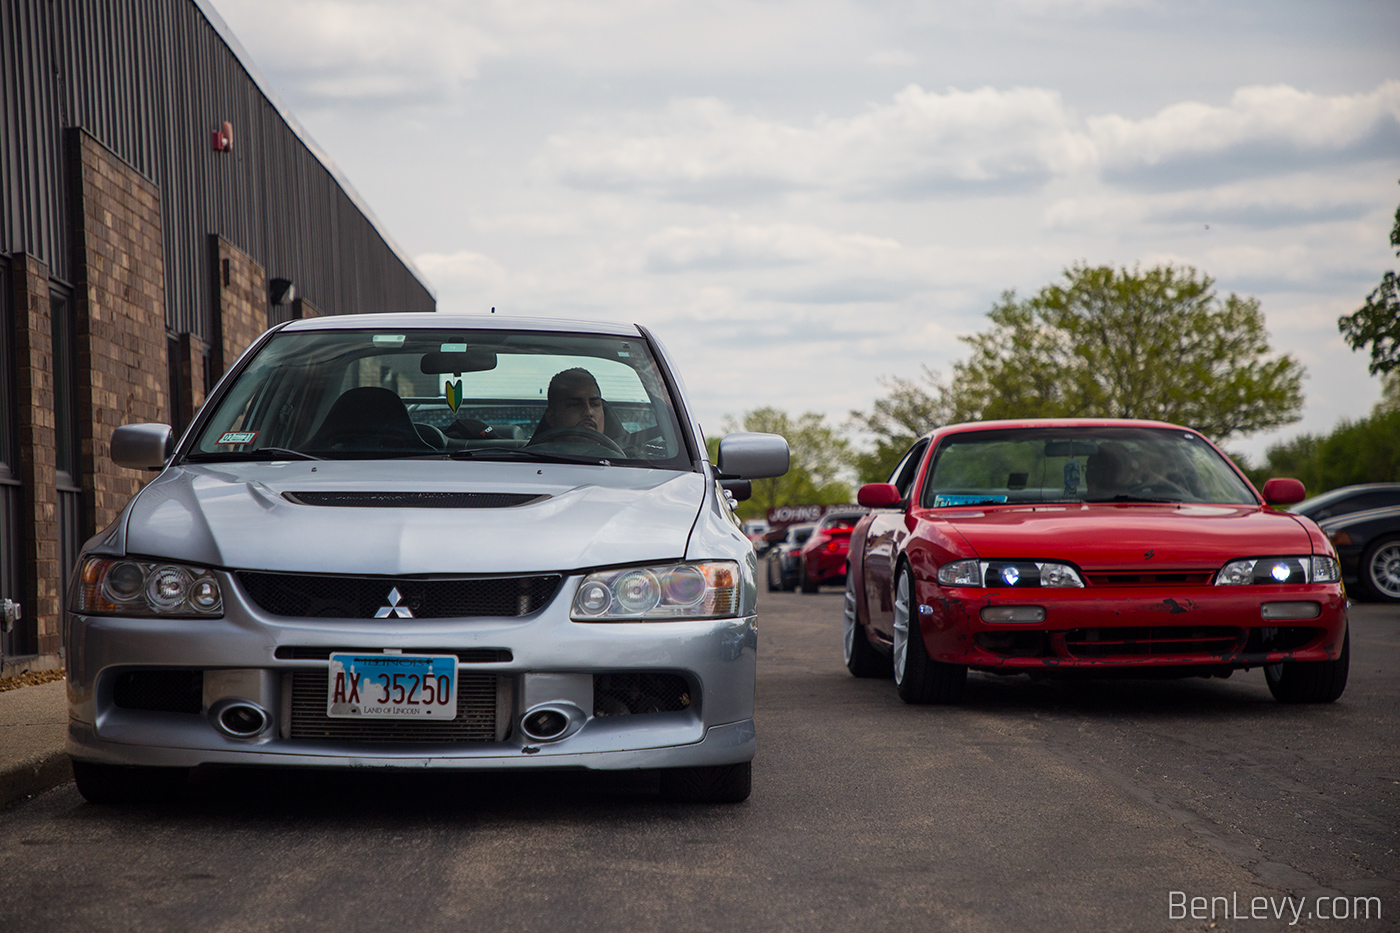 Silver Lancer Evo and Red 240SX